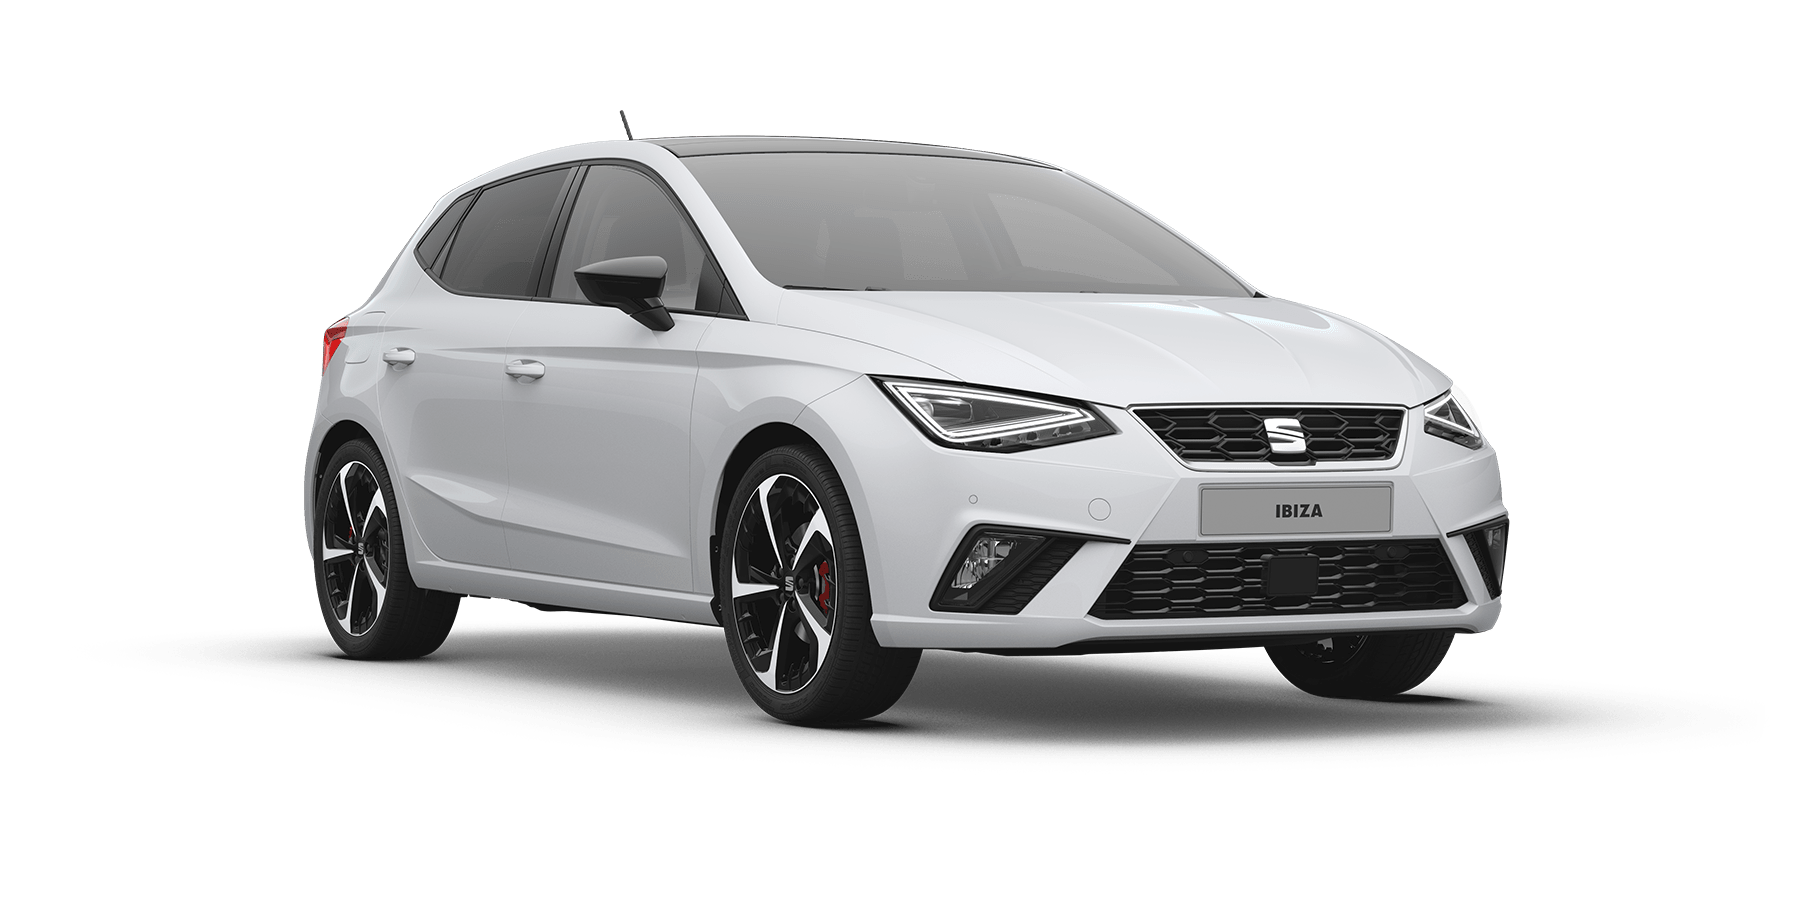 Differences between SEAT Leon and SEAT Ibiza - Which to choose